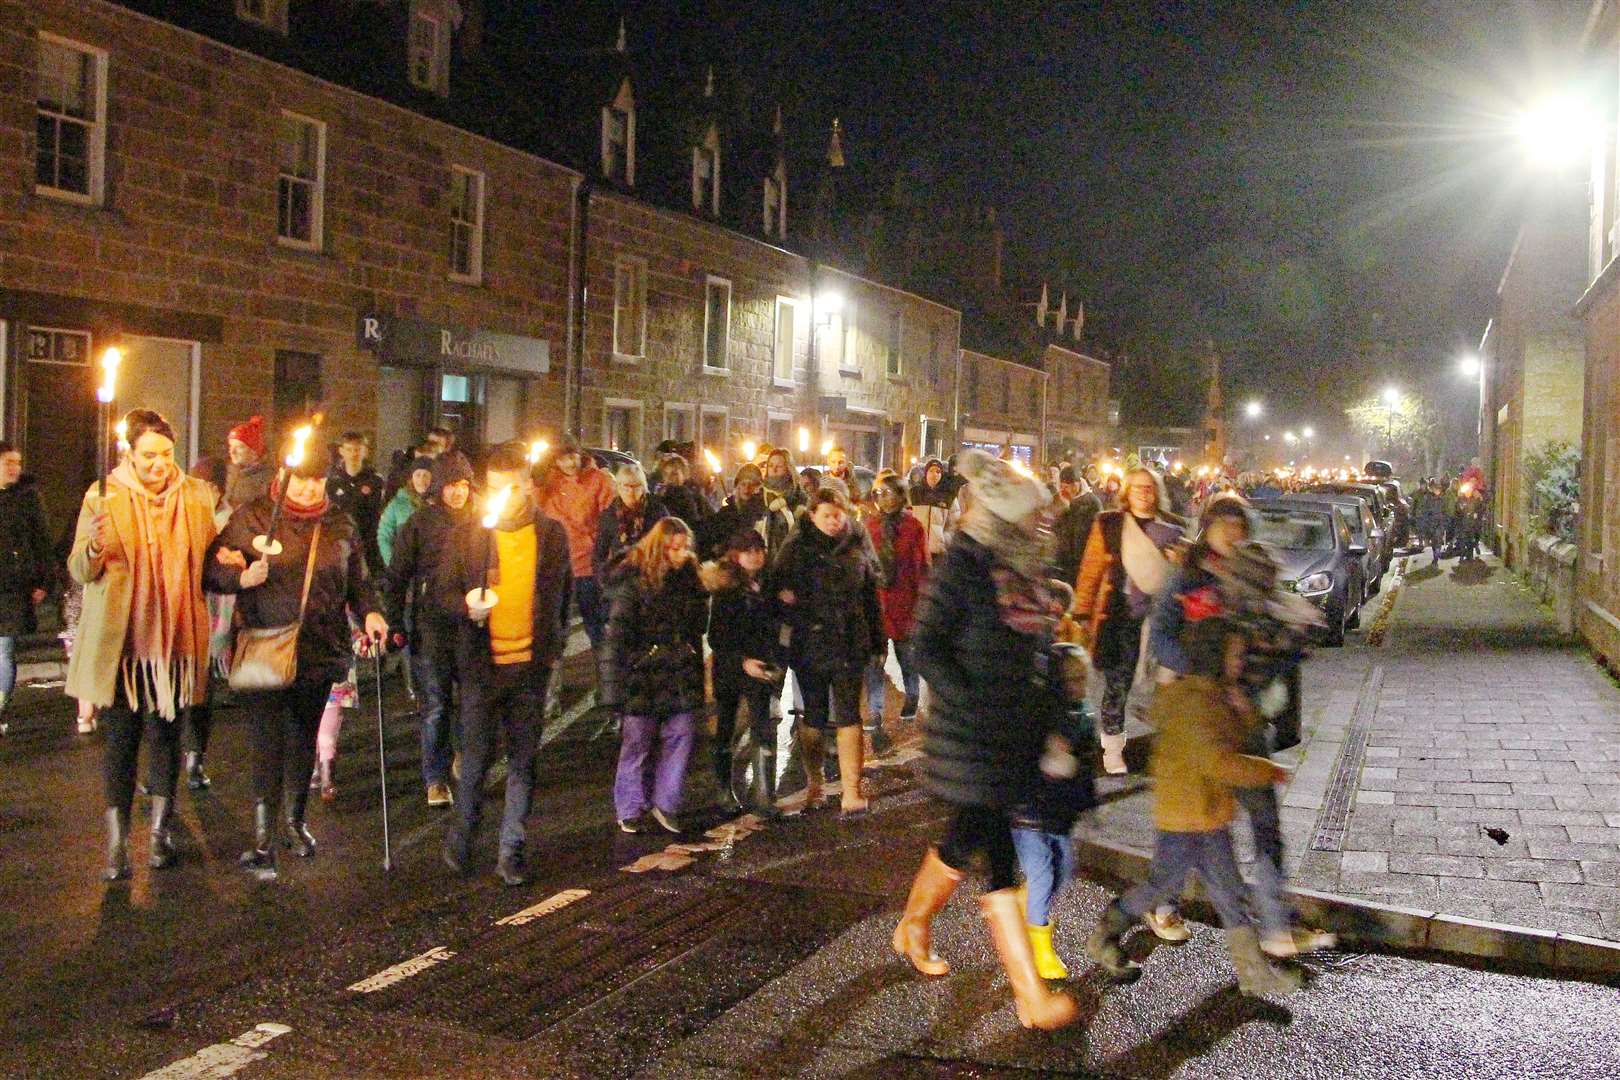 The torchlight parade marched from the town Square to Meadows Park. Picture: David Richardson